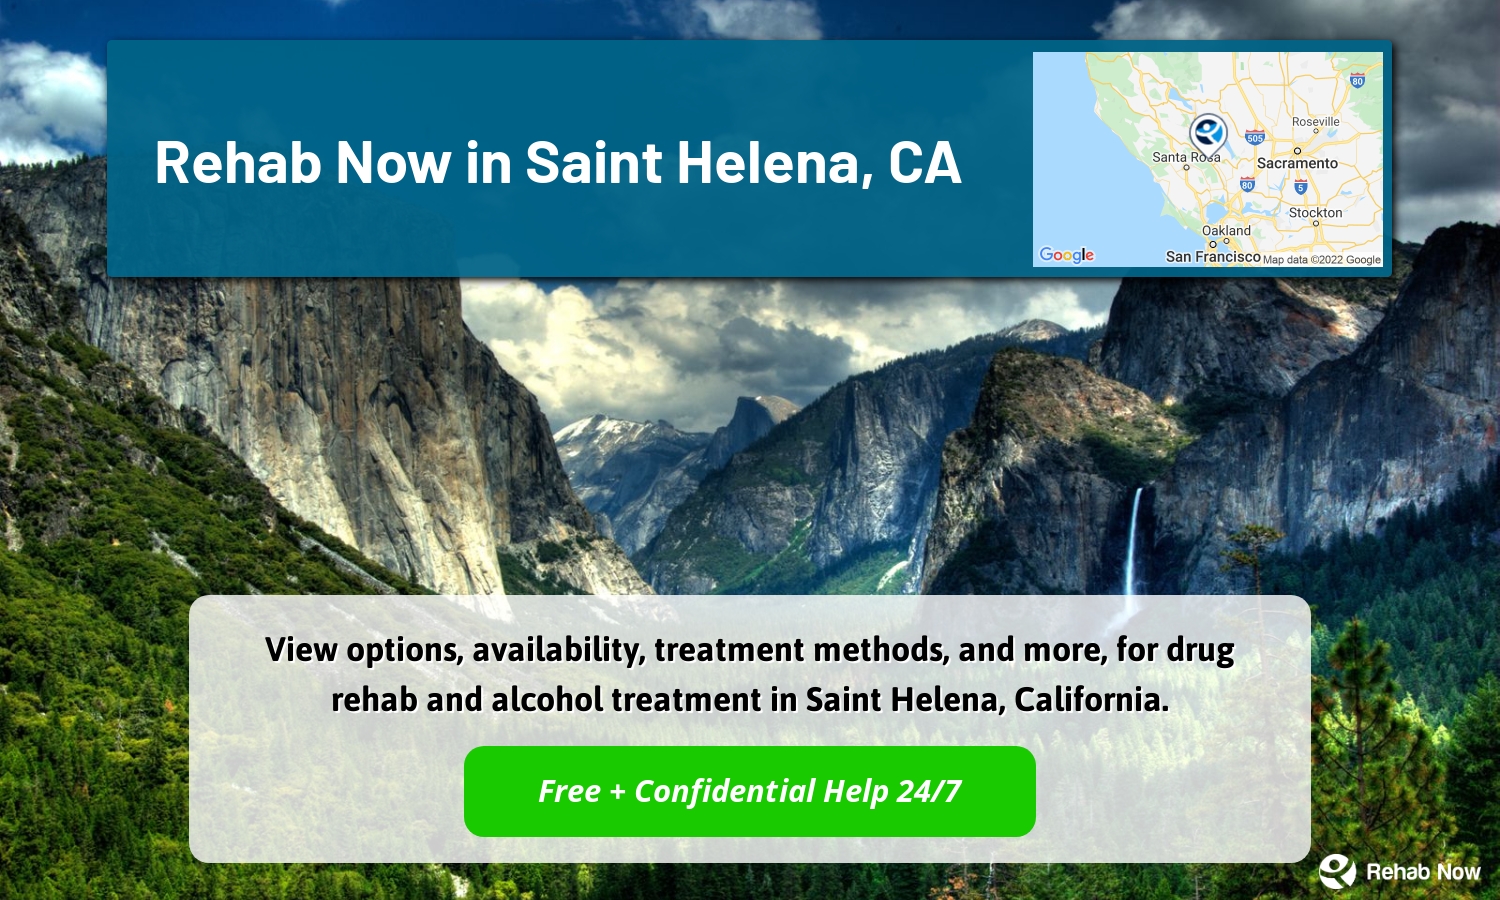 View options, availability, treatment methods, and more, for drug rehab and alcohol treatment in Saint Helena, California.